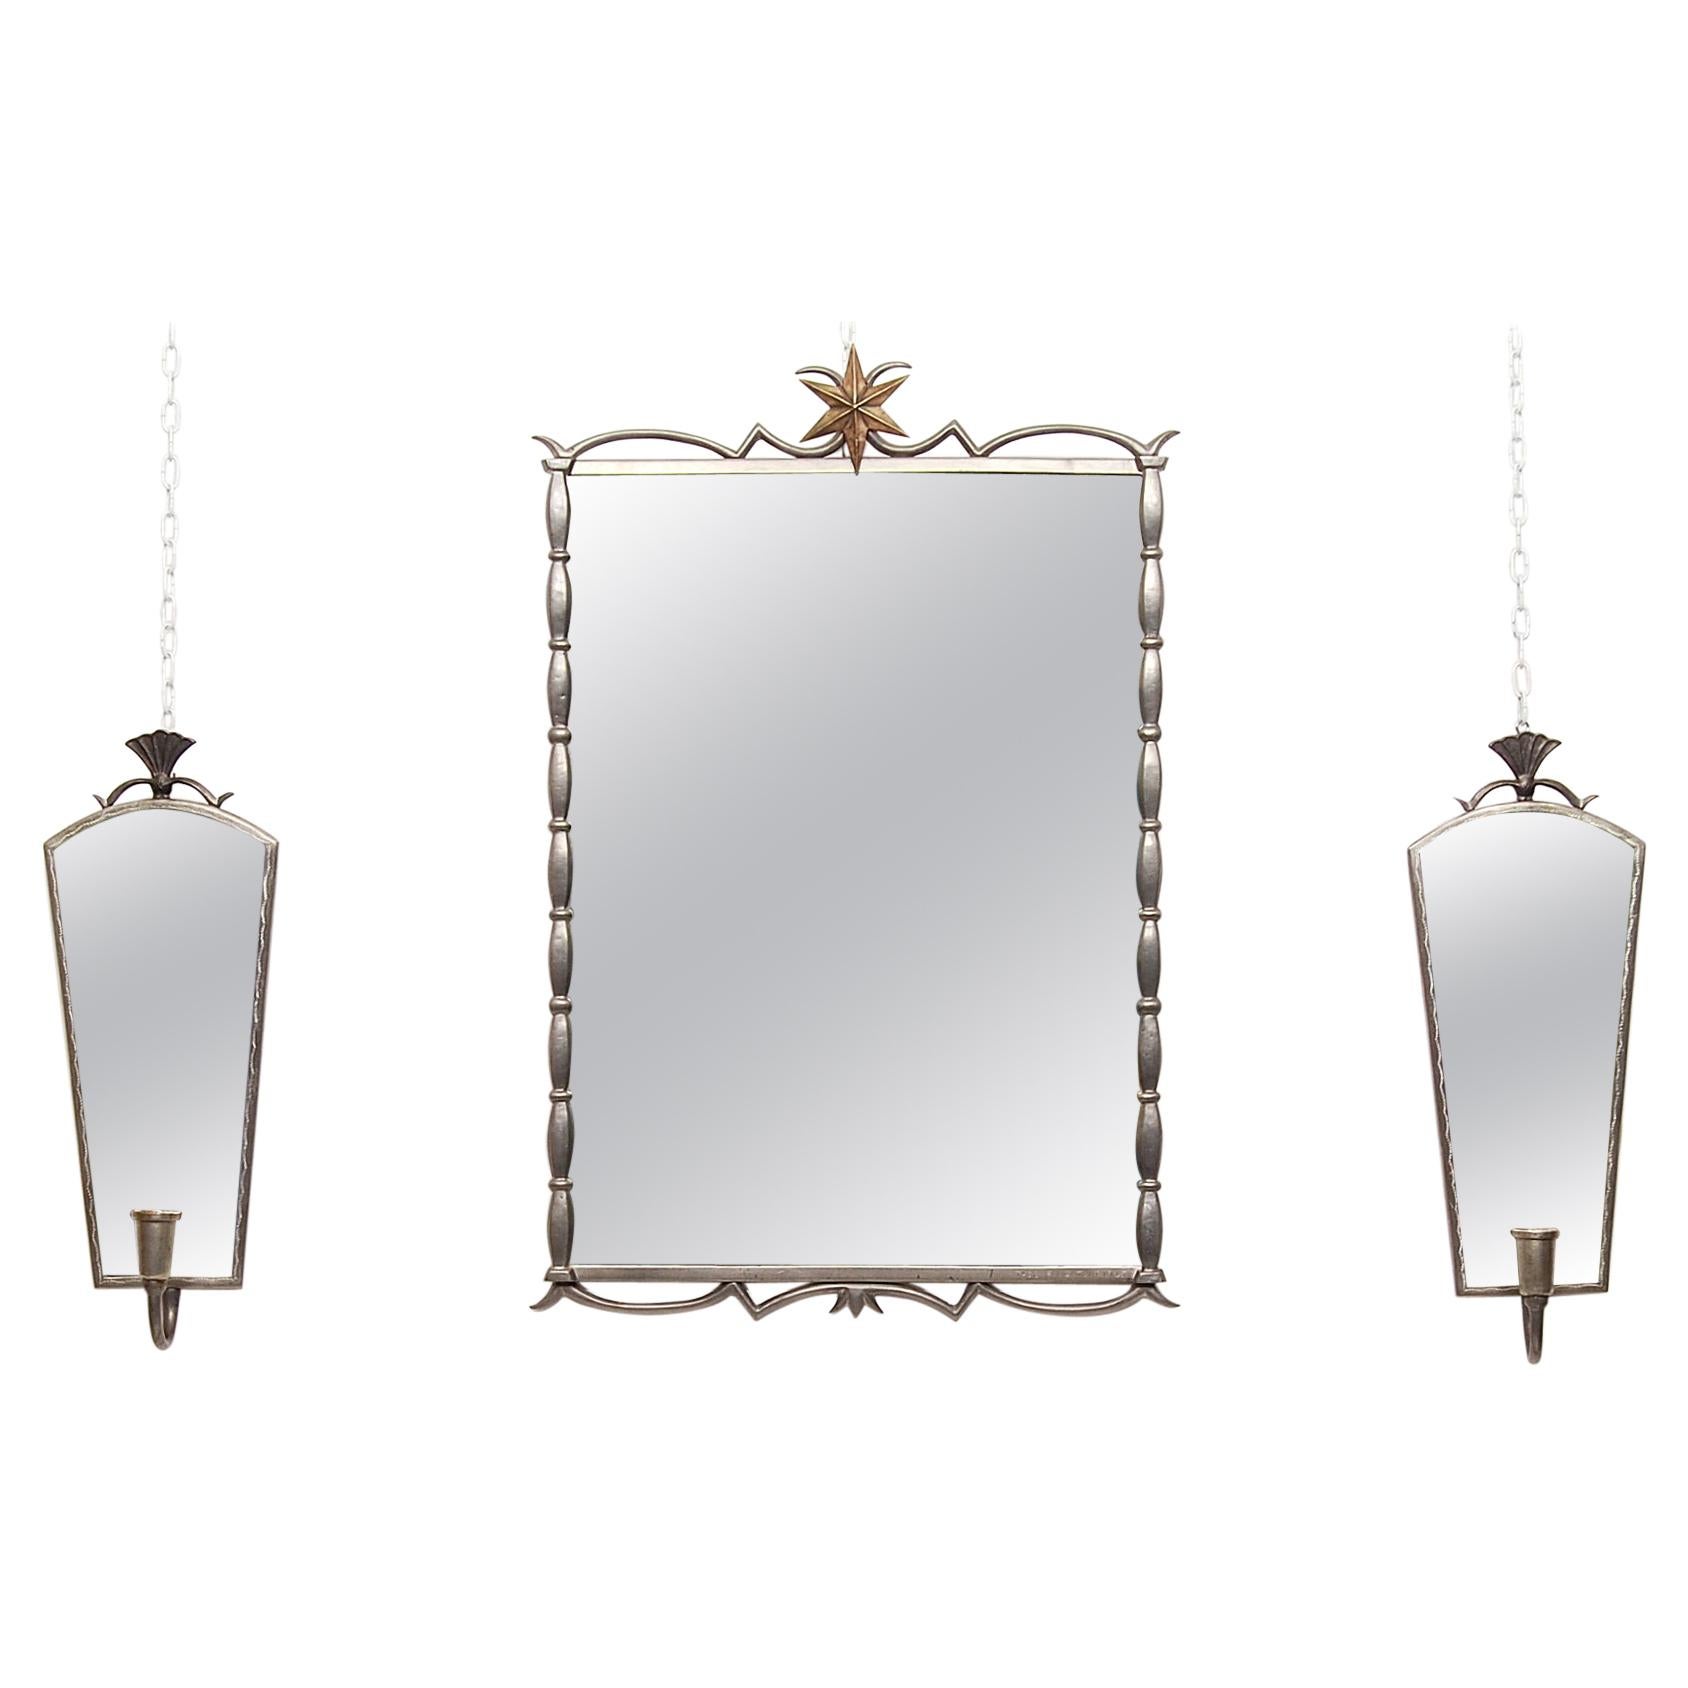 Tage Fougstedt Pewter Mirror and Sconces, Swedish Grace, 1920s